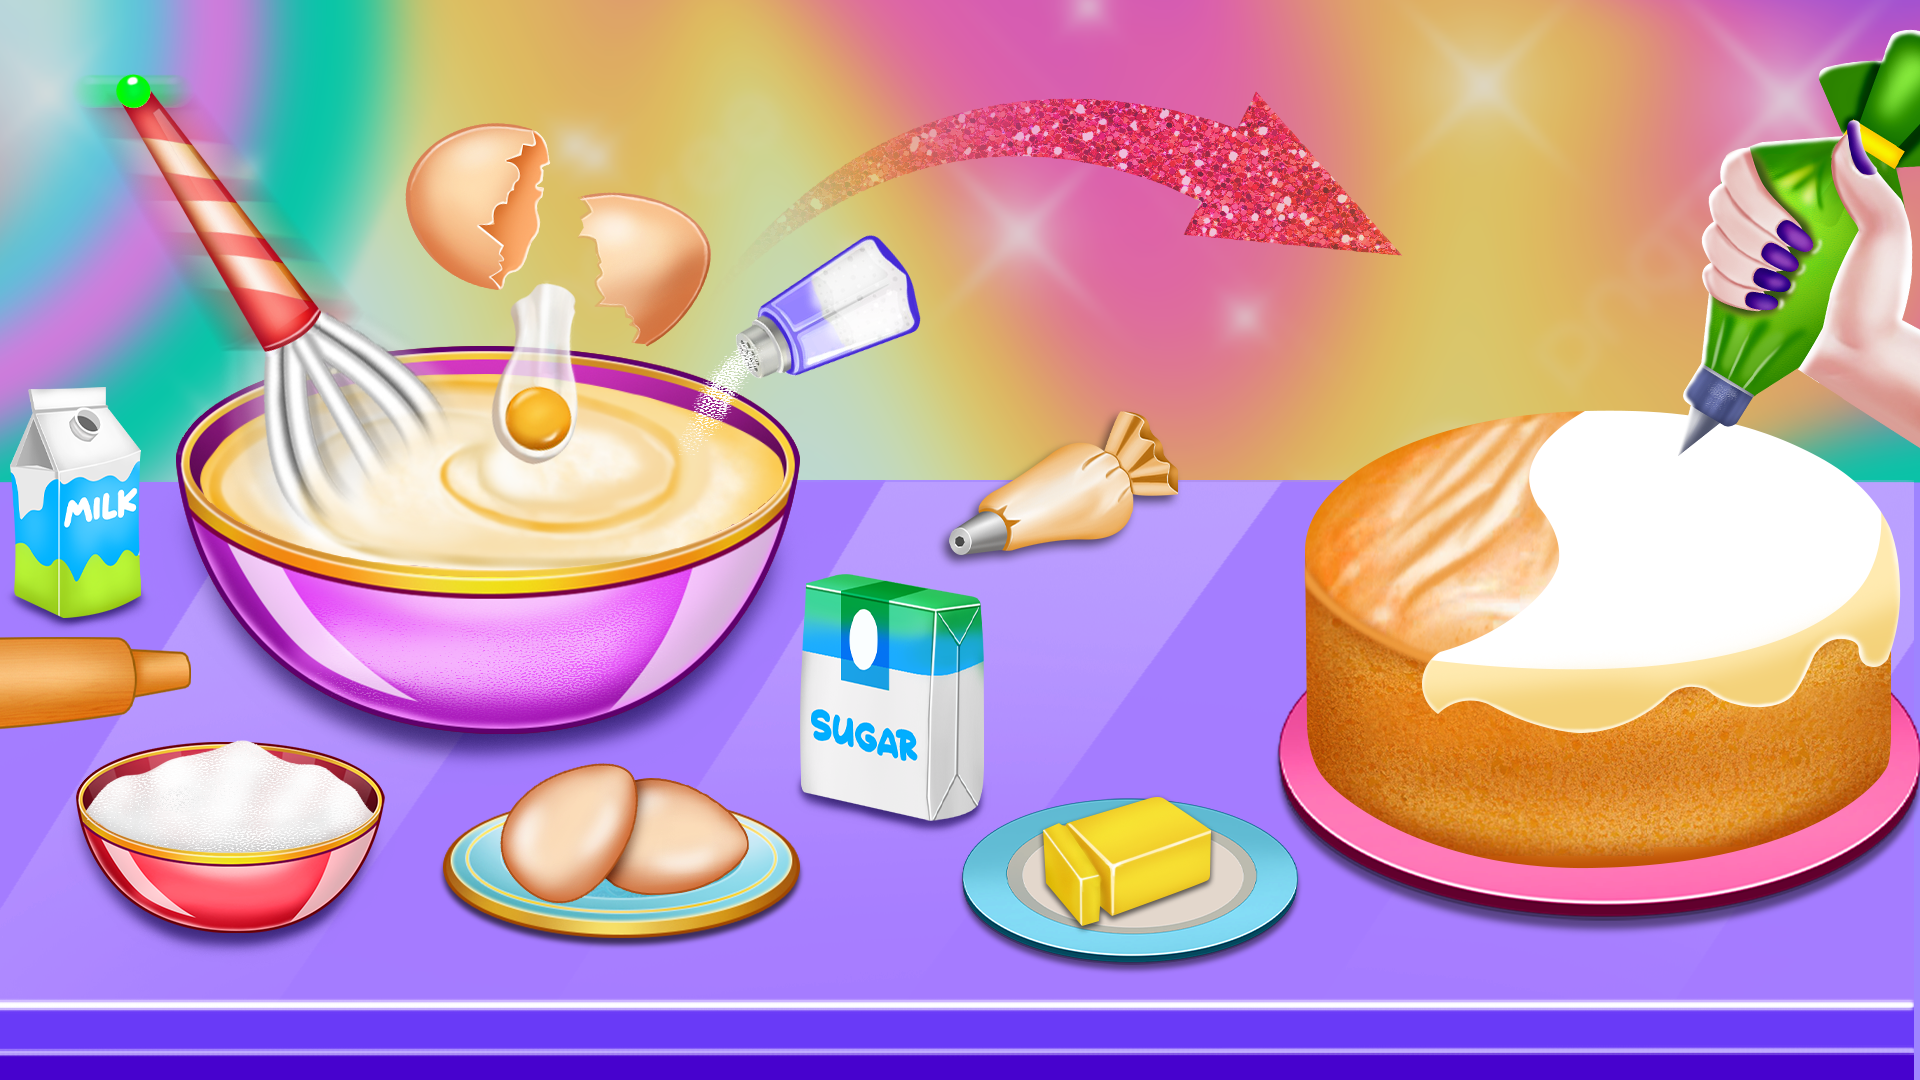 Download My Bakery Empire: Bake a Cake APK FREE